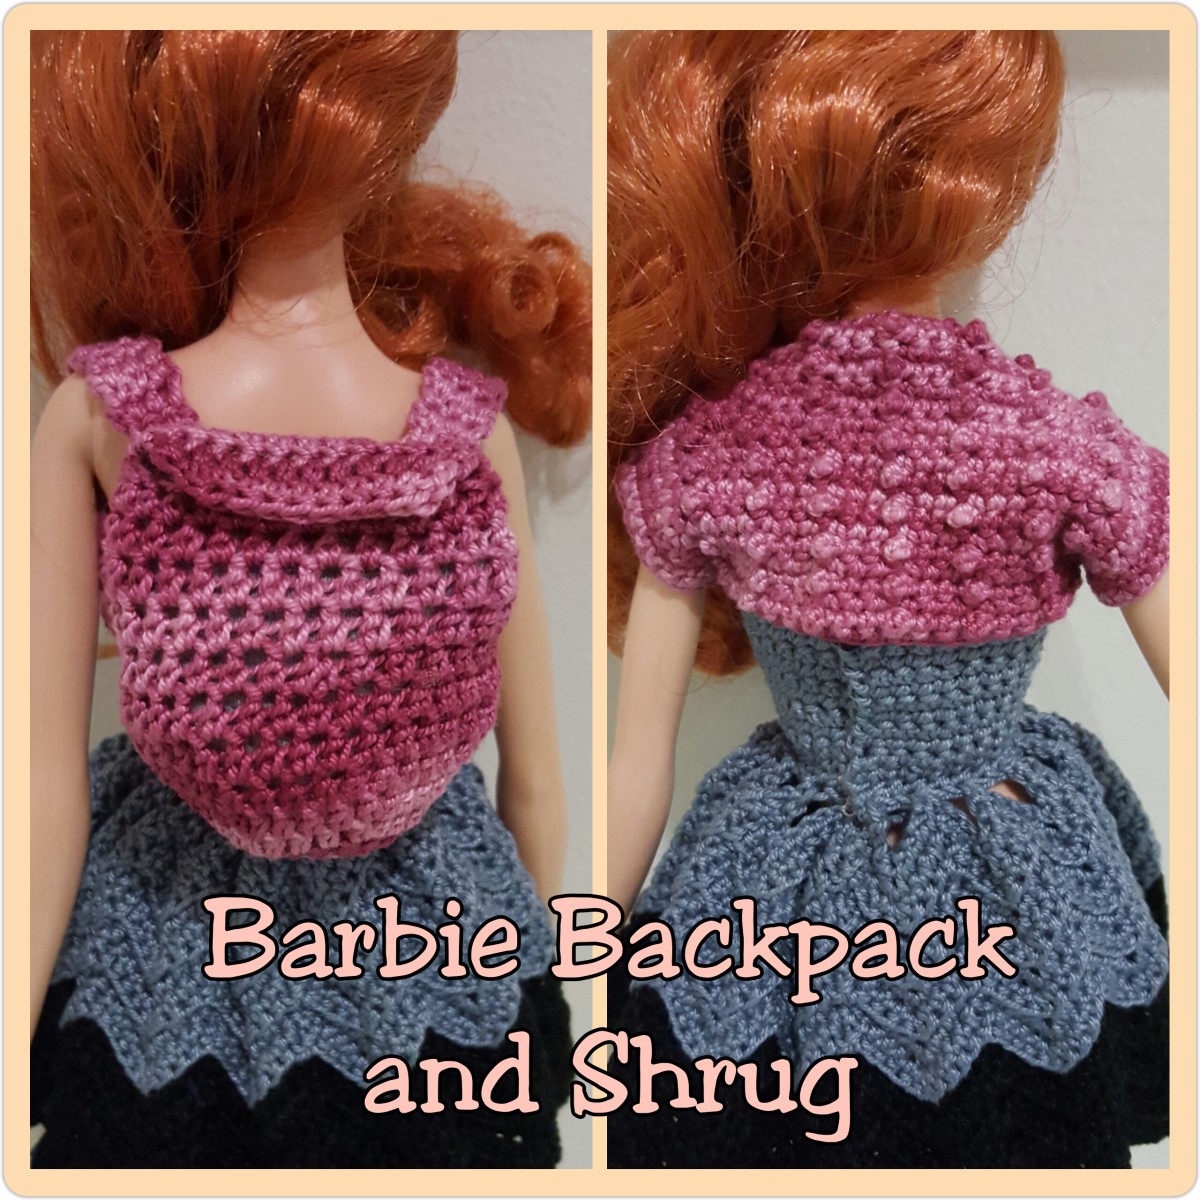 Barbie Backpack and Berry-Stitched Shrug (Free Crochet Pattern)